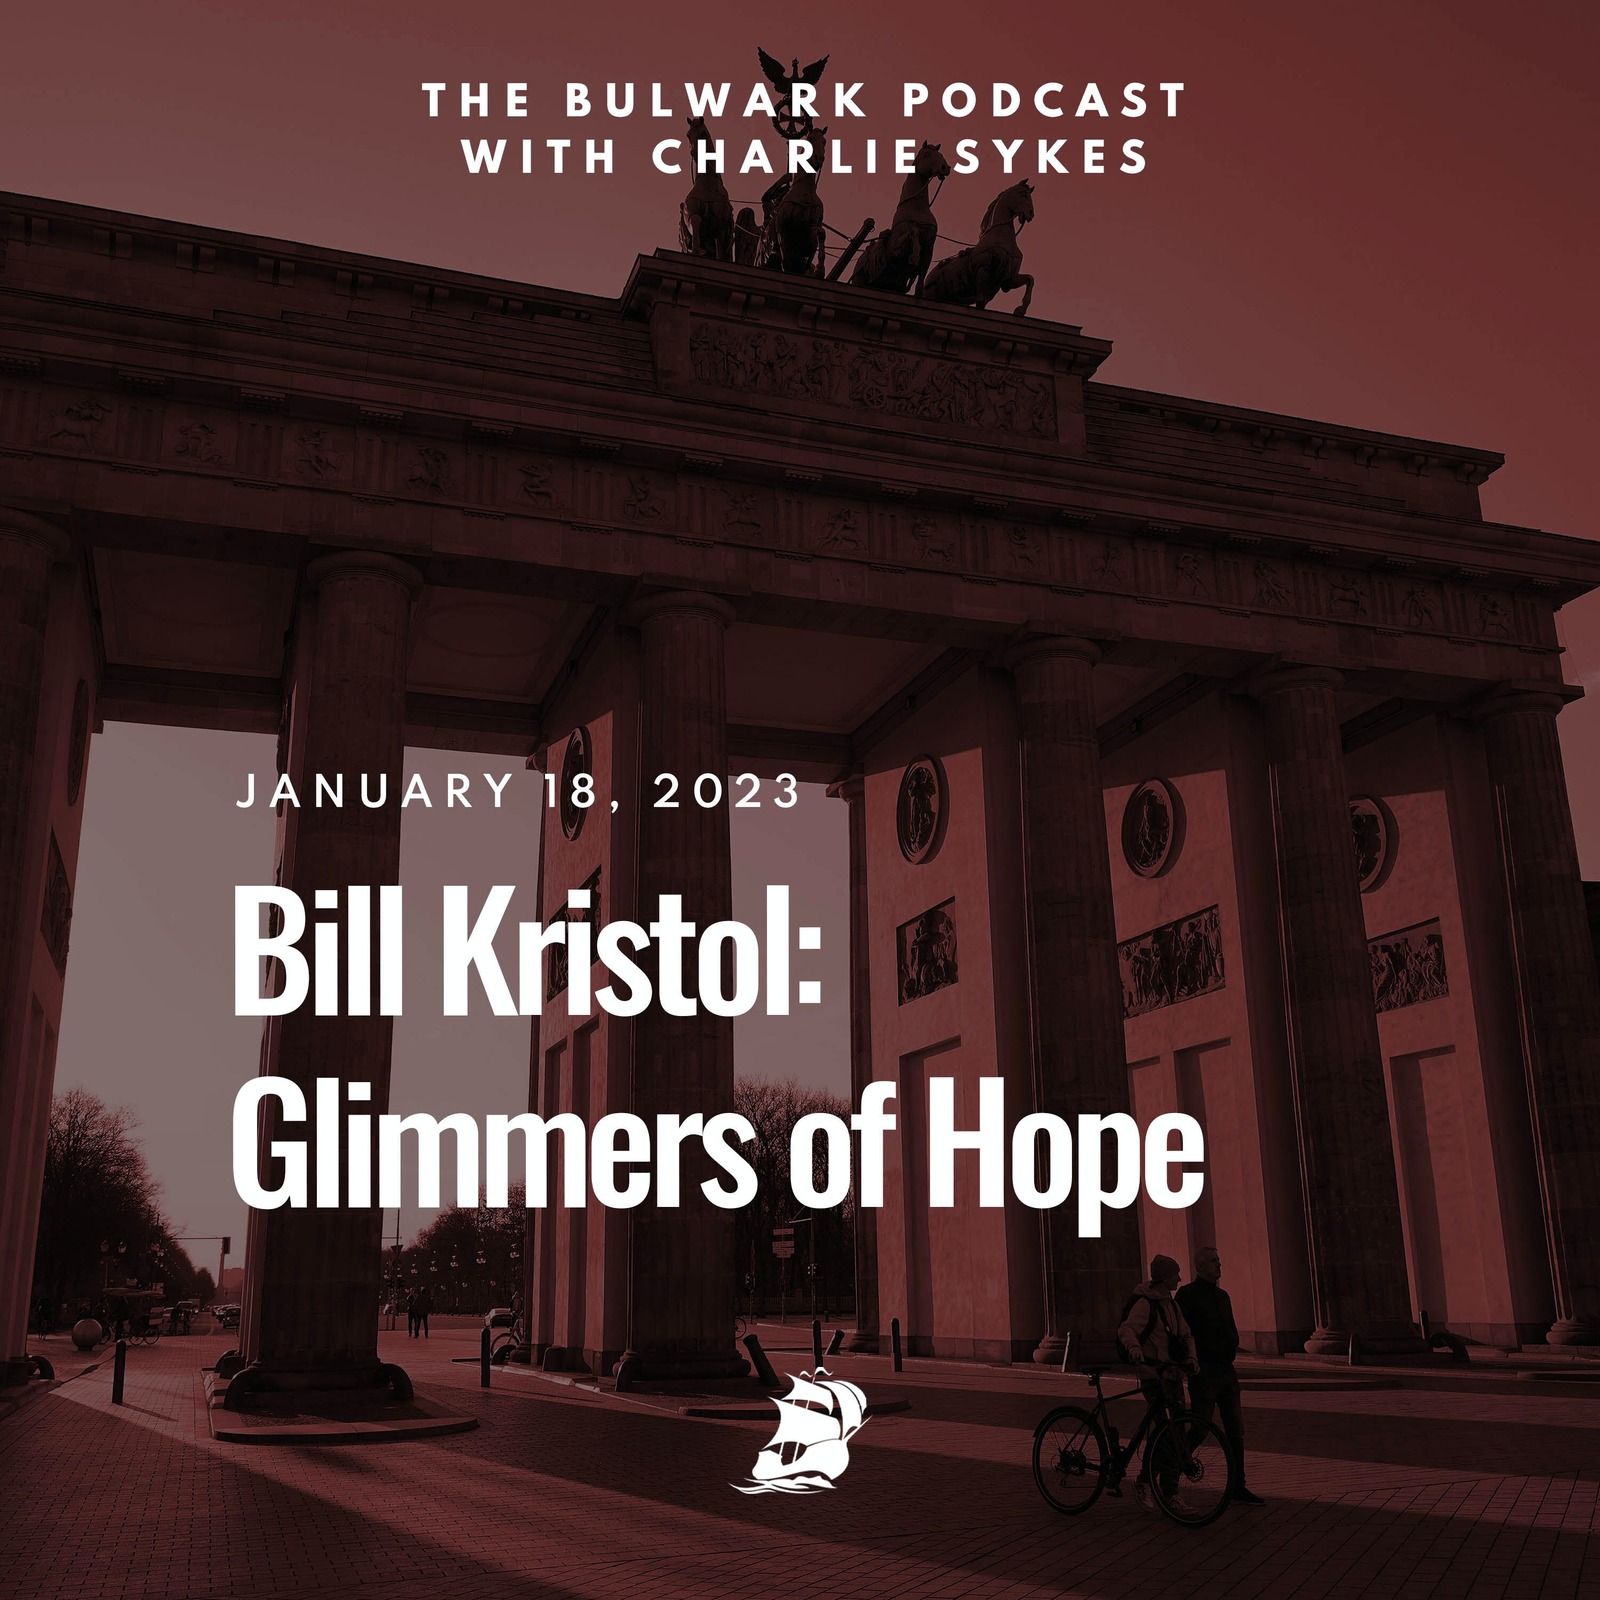 Bill Kristol: Glimmers of Hope by The Bulwark Podcast